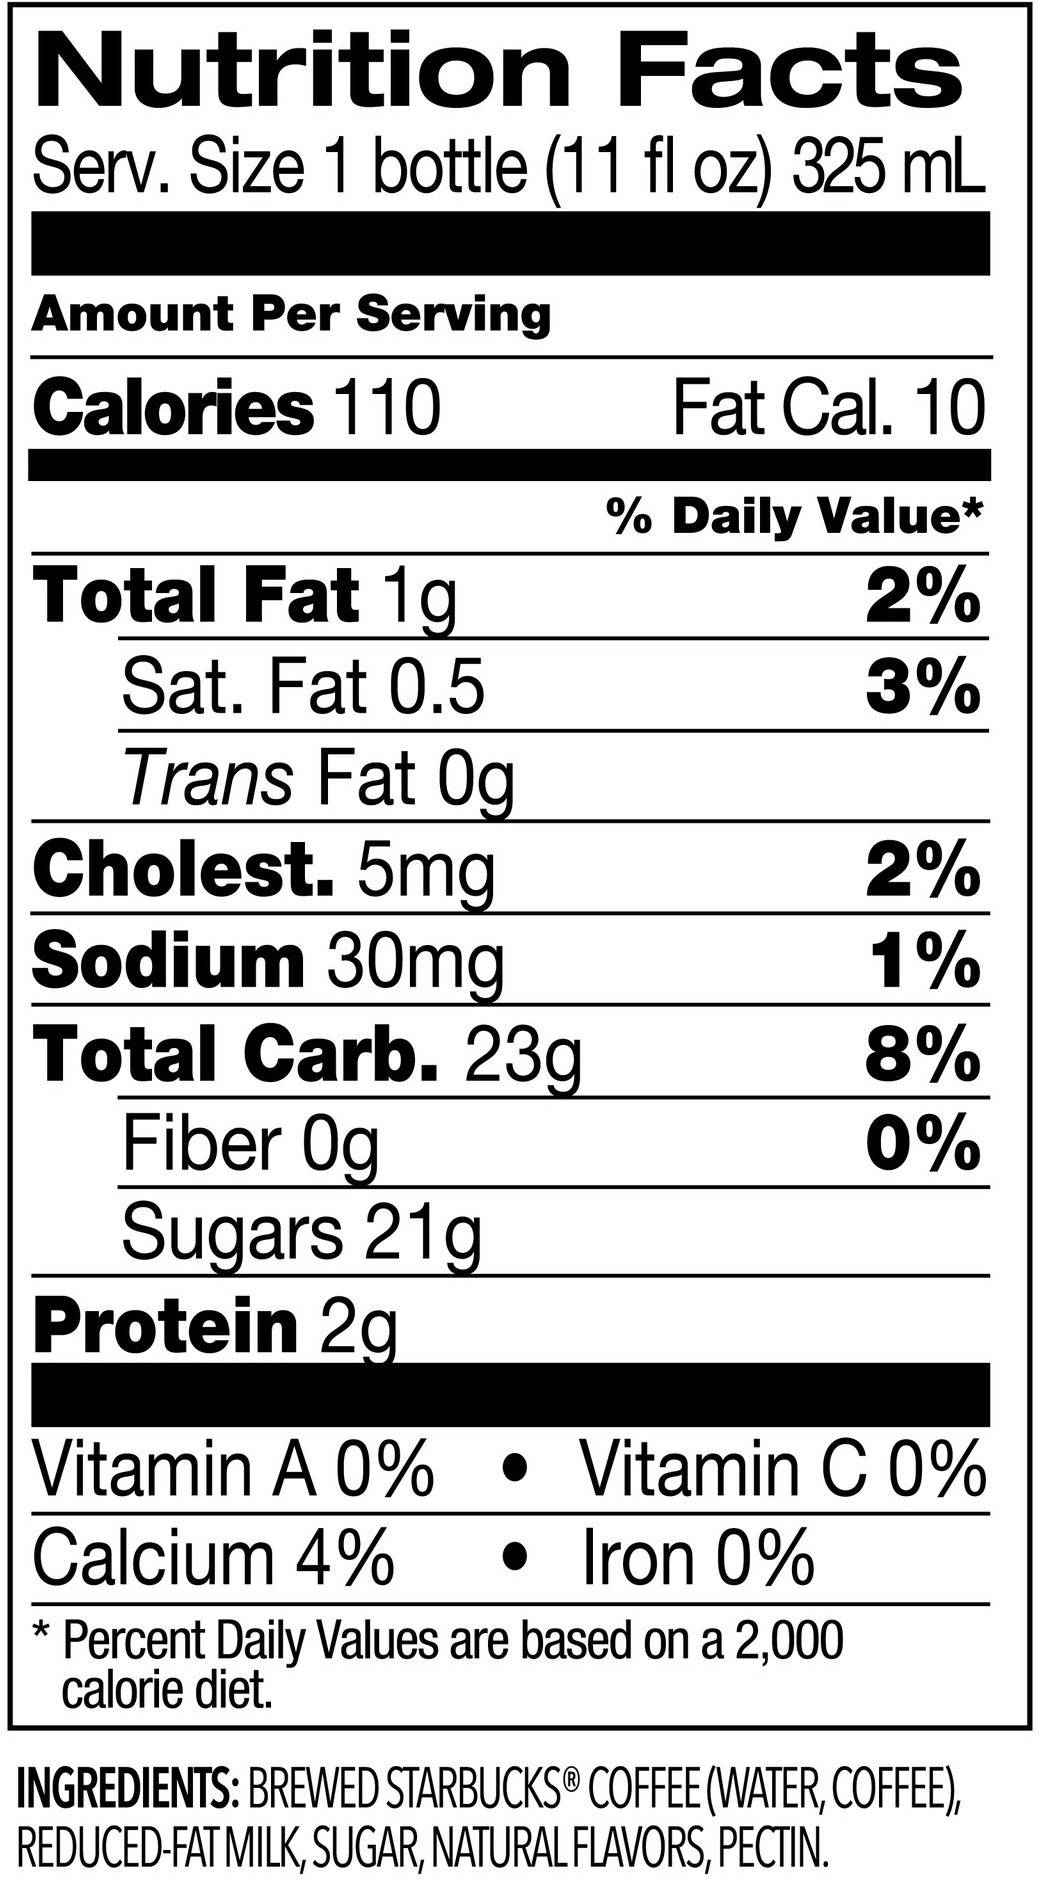 Image describing nutrition information for product Starbucks Iced Coffee Caramel